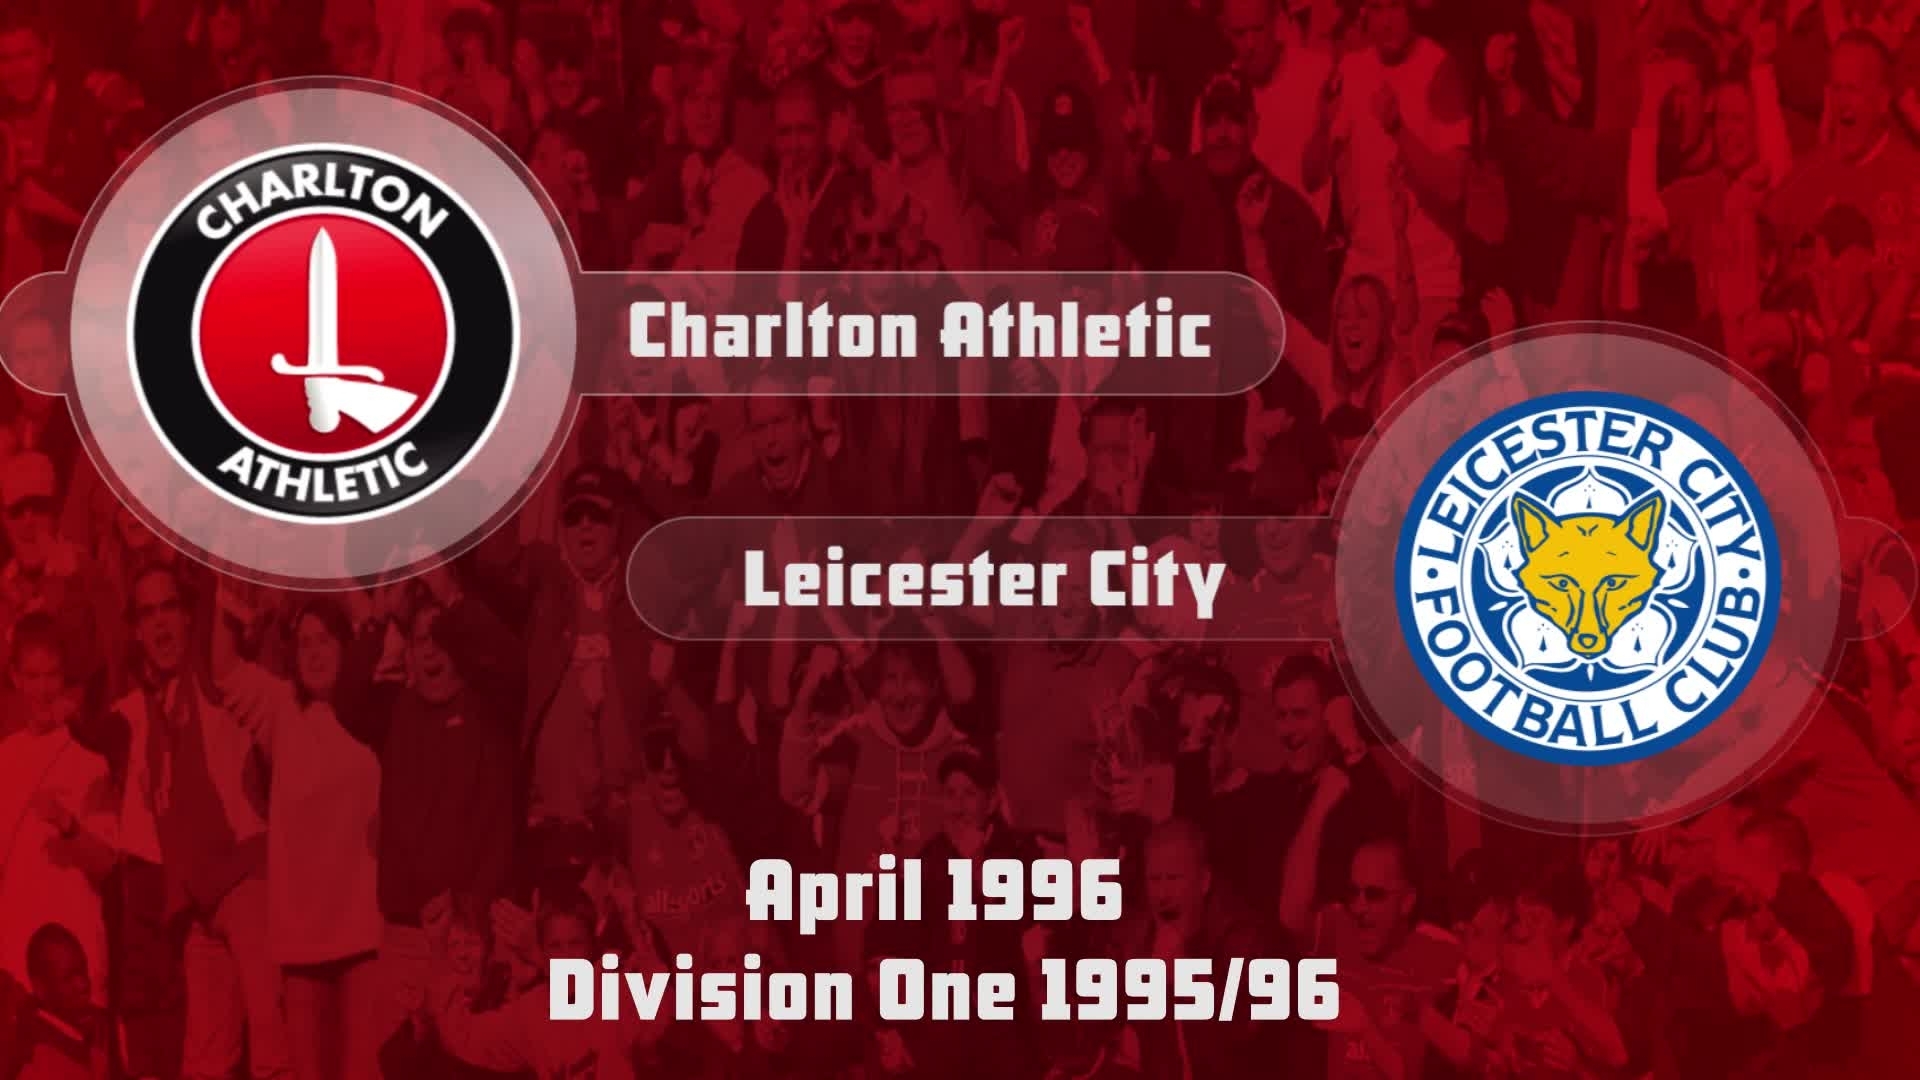 47 HIGHLIGHTS | Charlton 0 Leicester City 1 (April 1996)